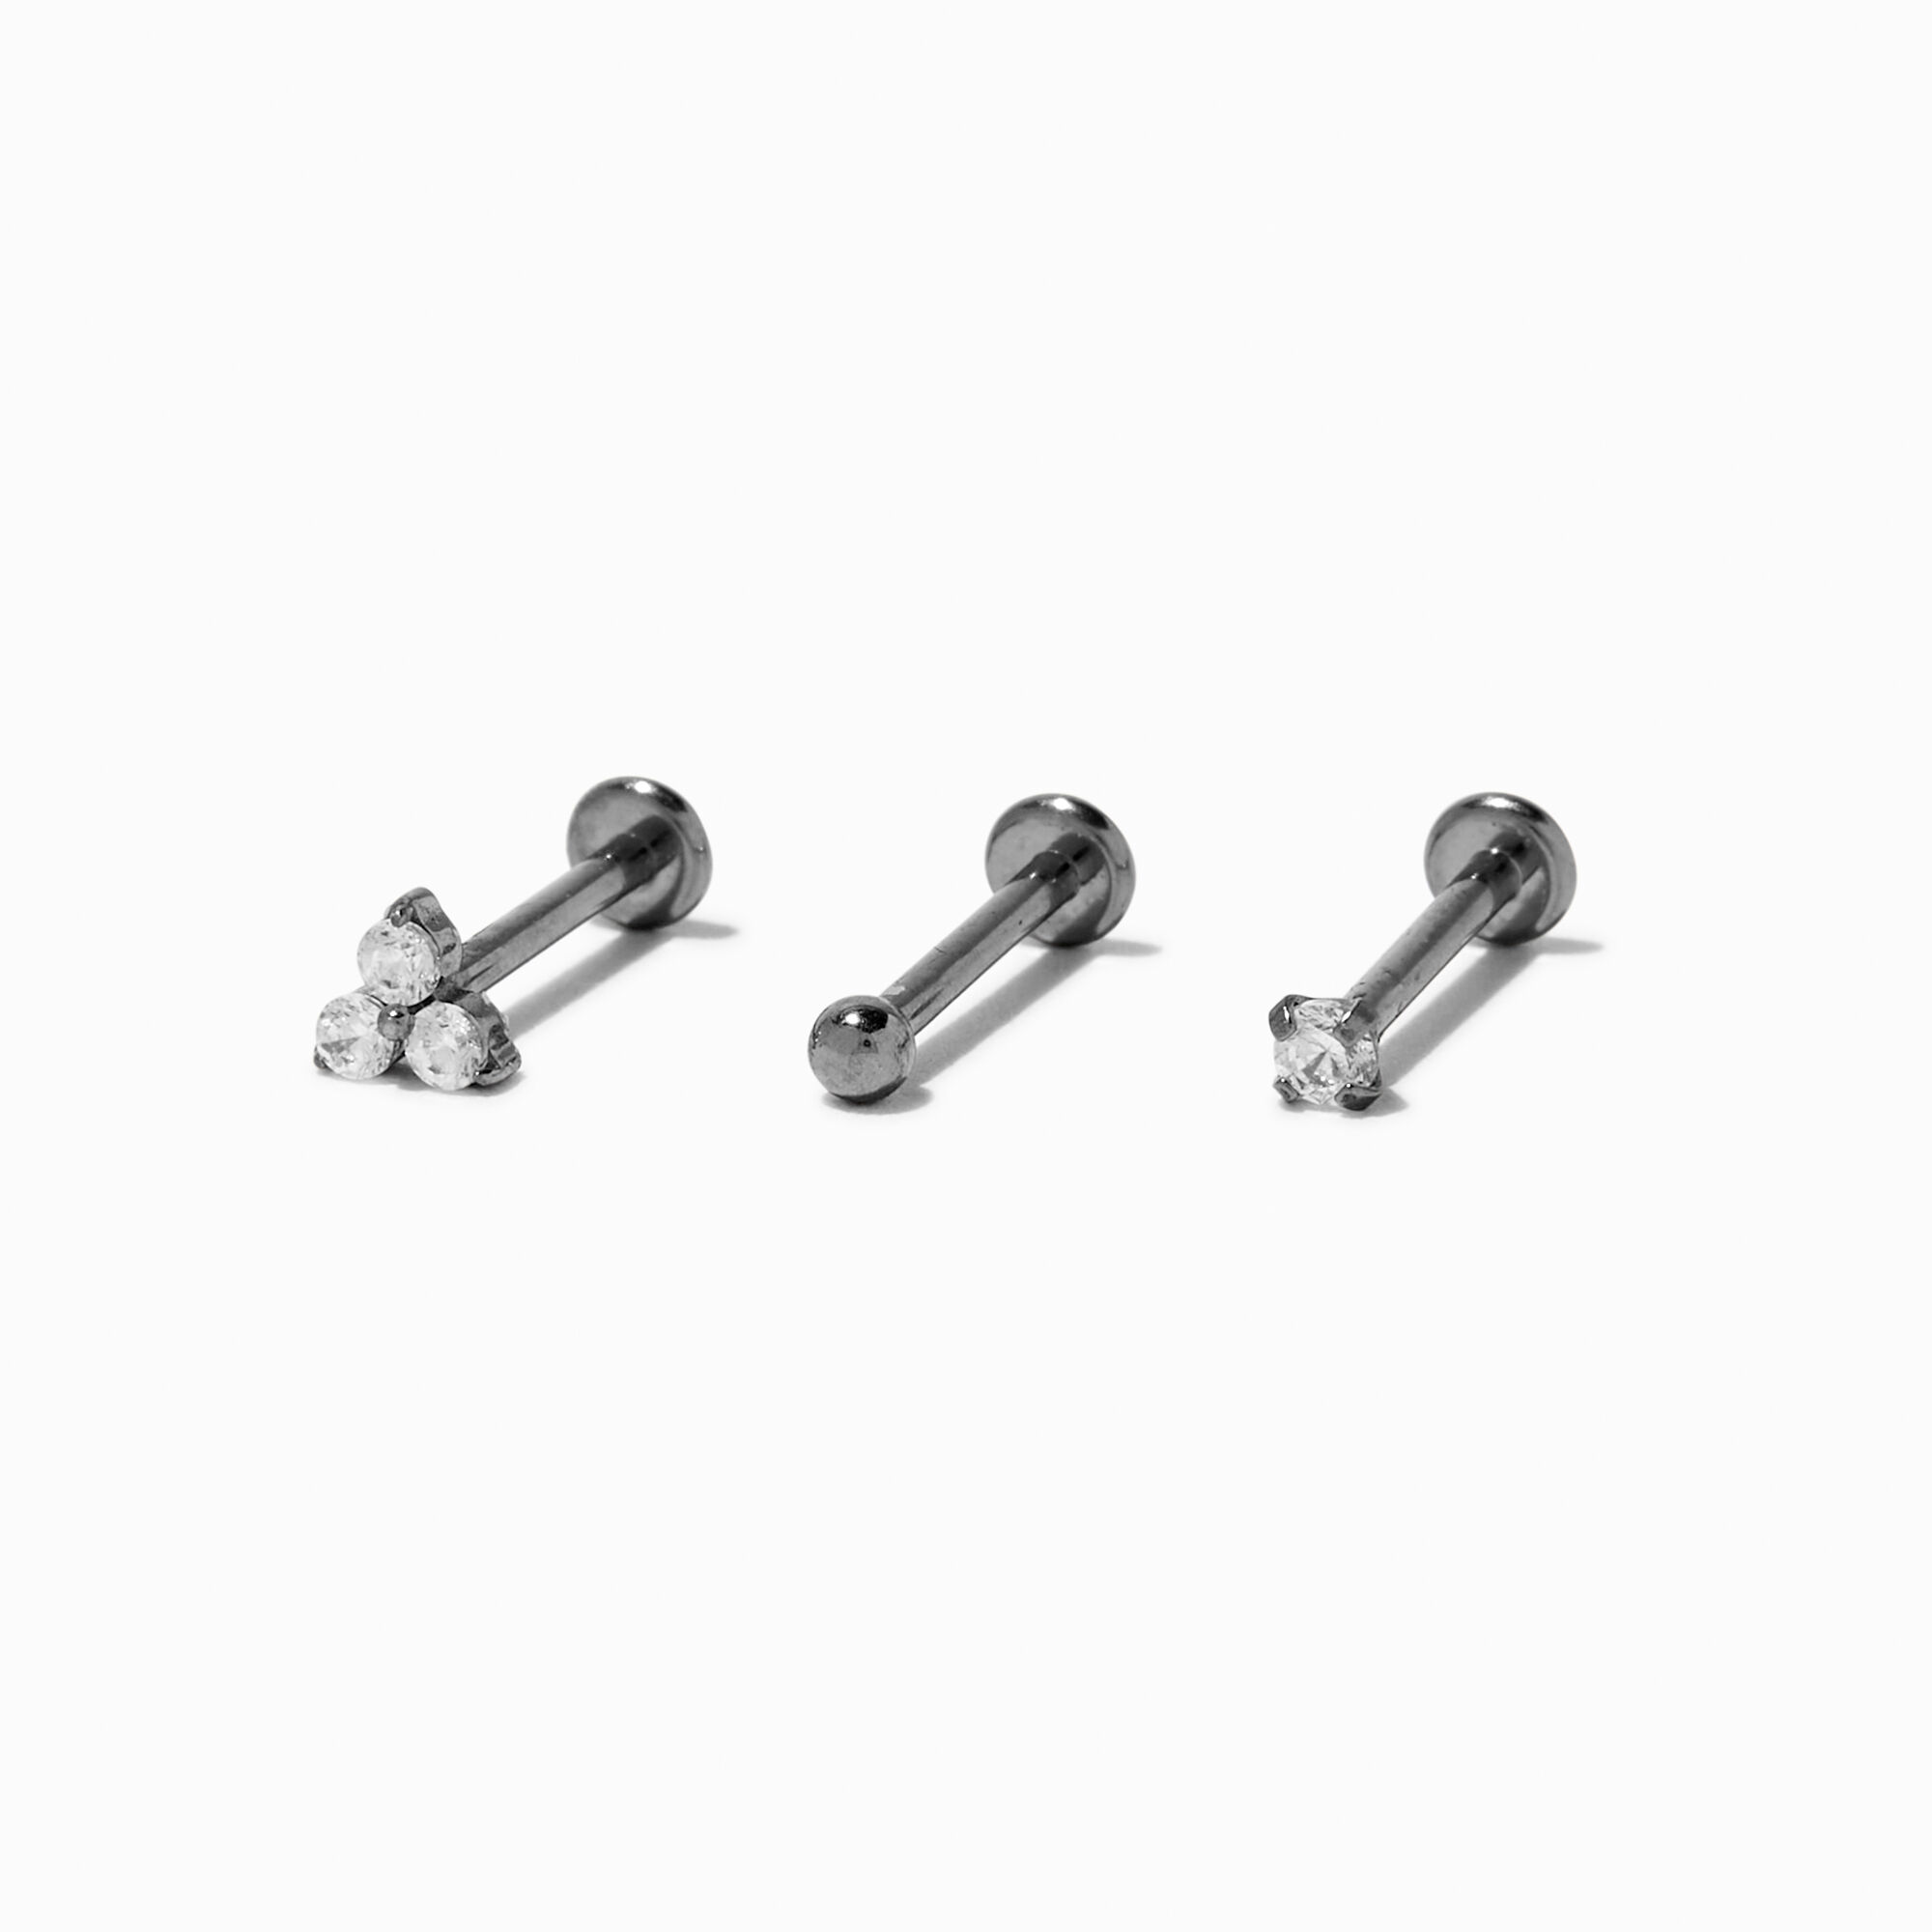 View Claires Tone Titanium Cubic Zirconia 18G Threadless Tragus Earring 3 Pack Silver information